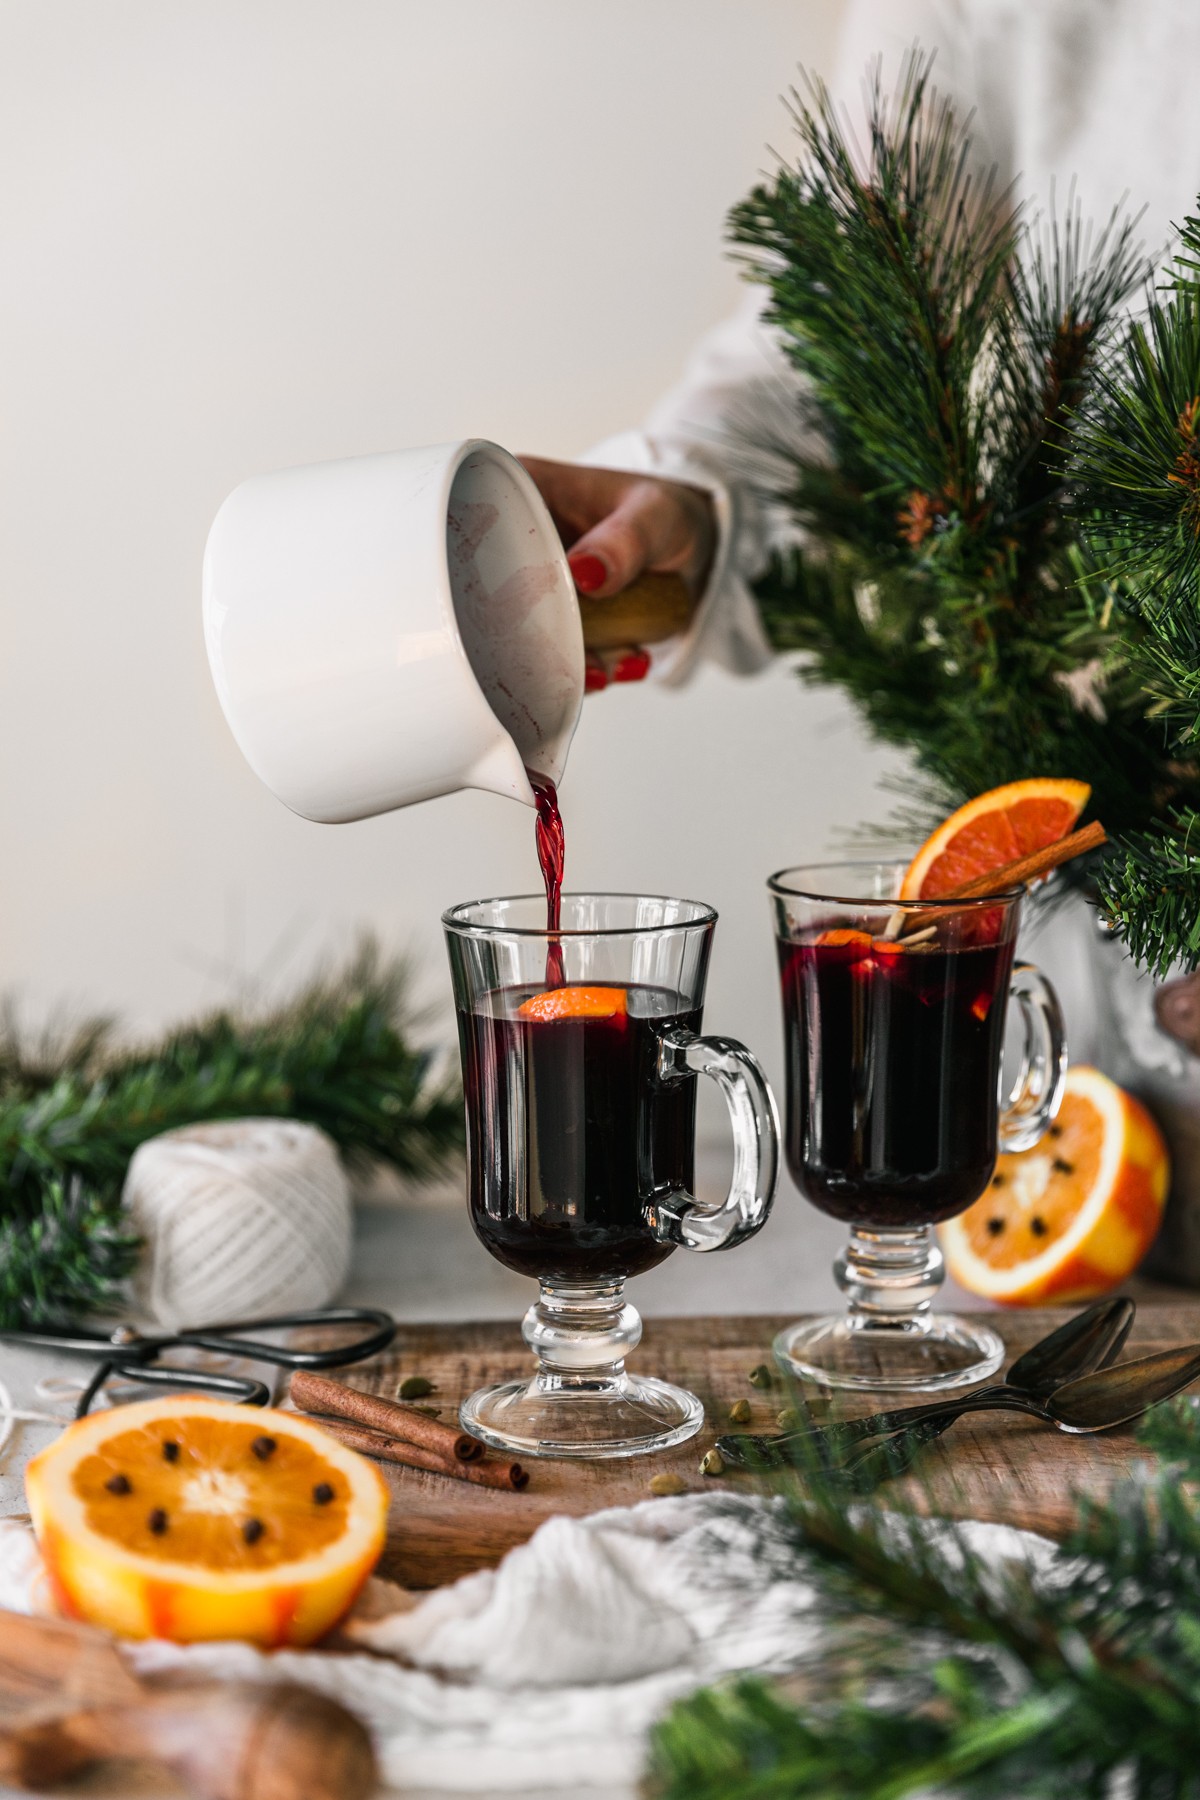 A hand pouring gløgg into a glass on a wood board next to another glass of Norwegian mulled wine, cinnamon sticks, orange halves, and pine branches on a white background.